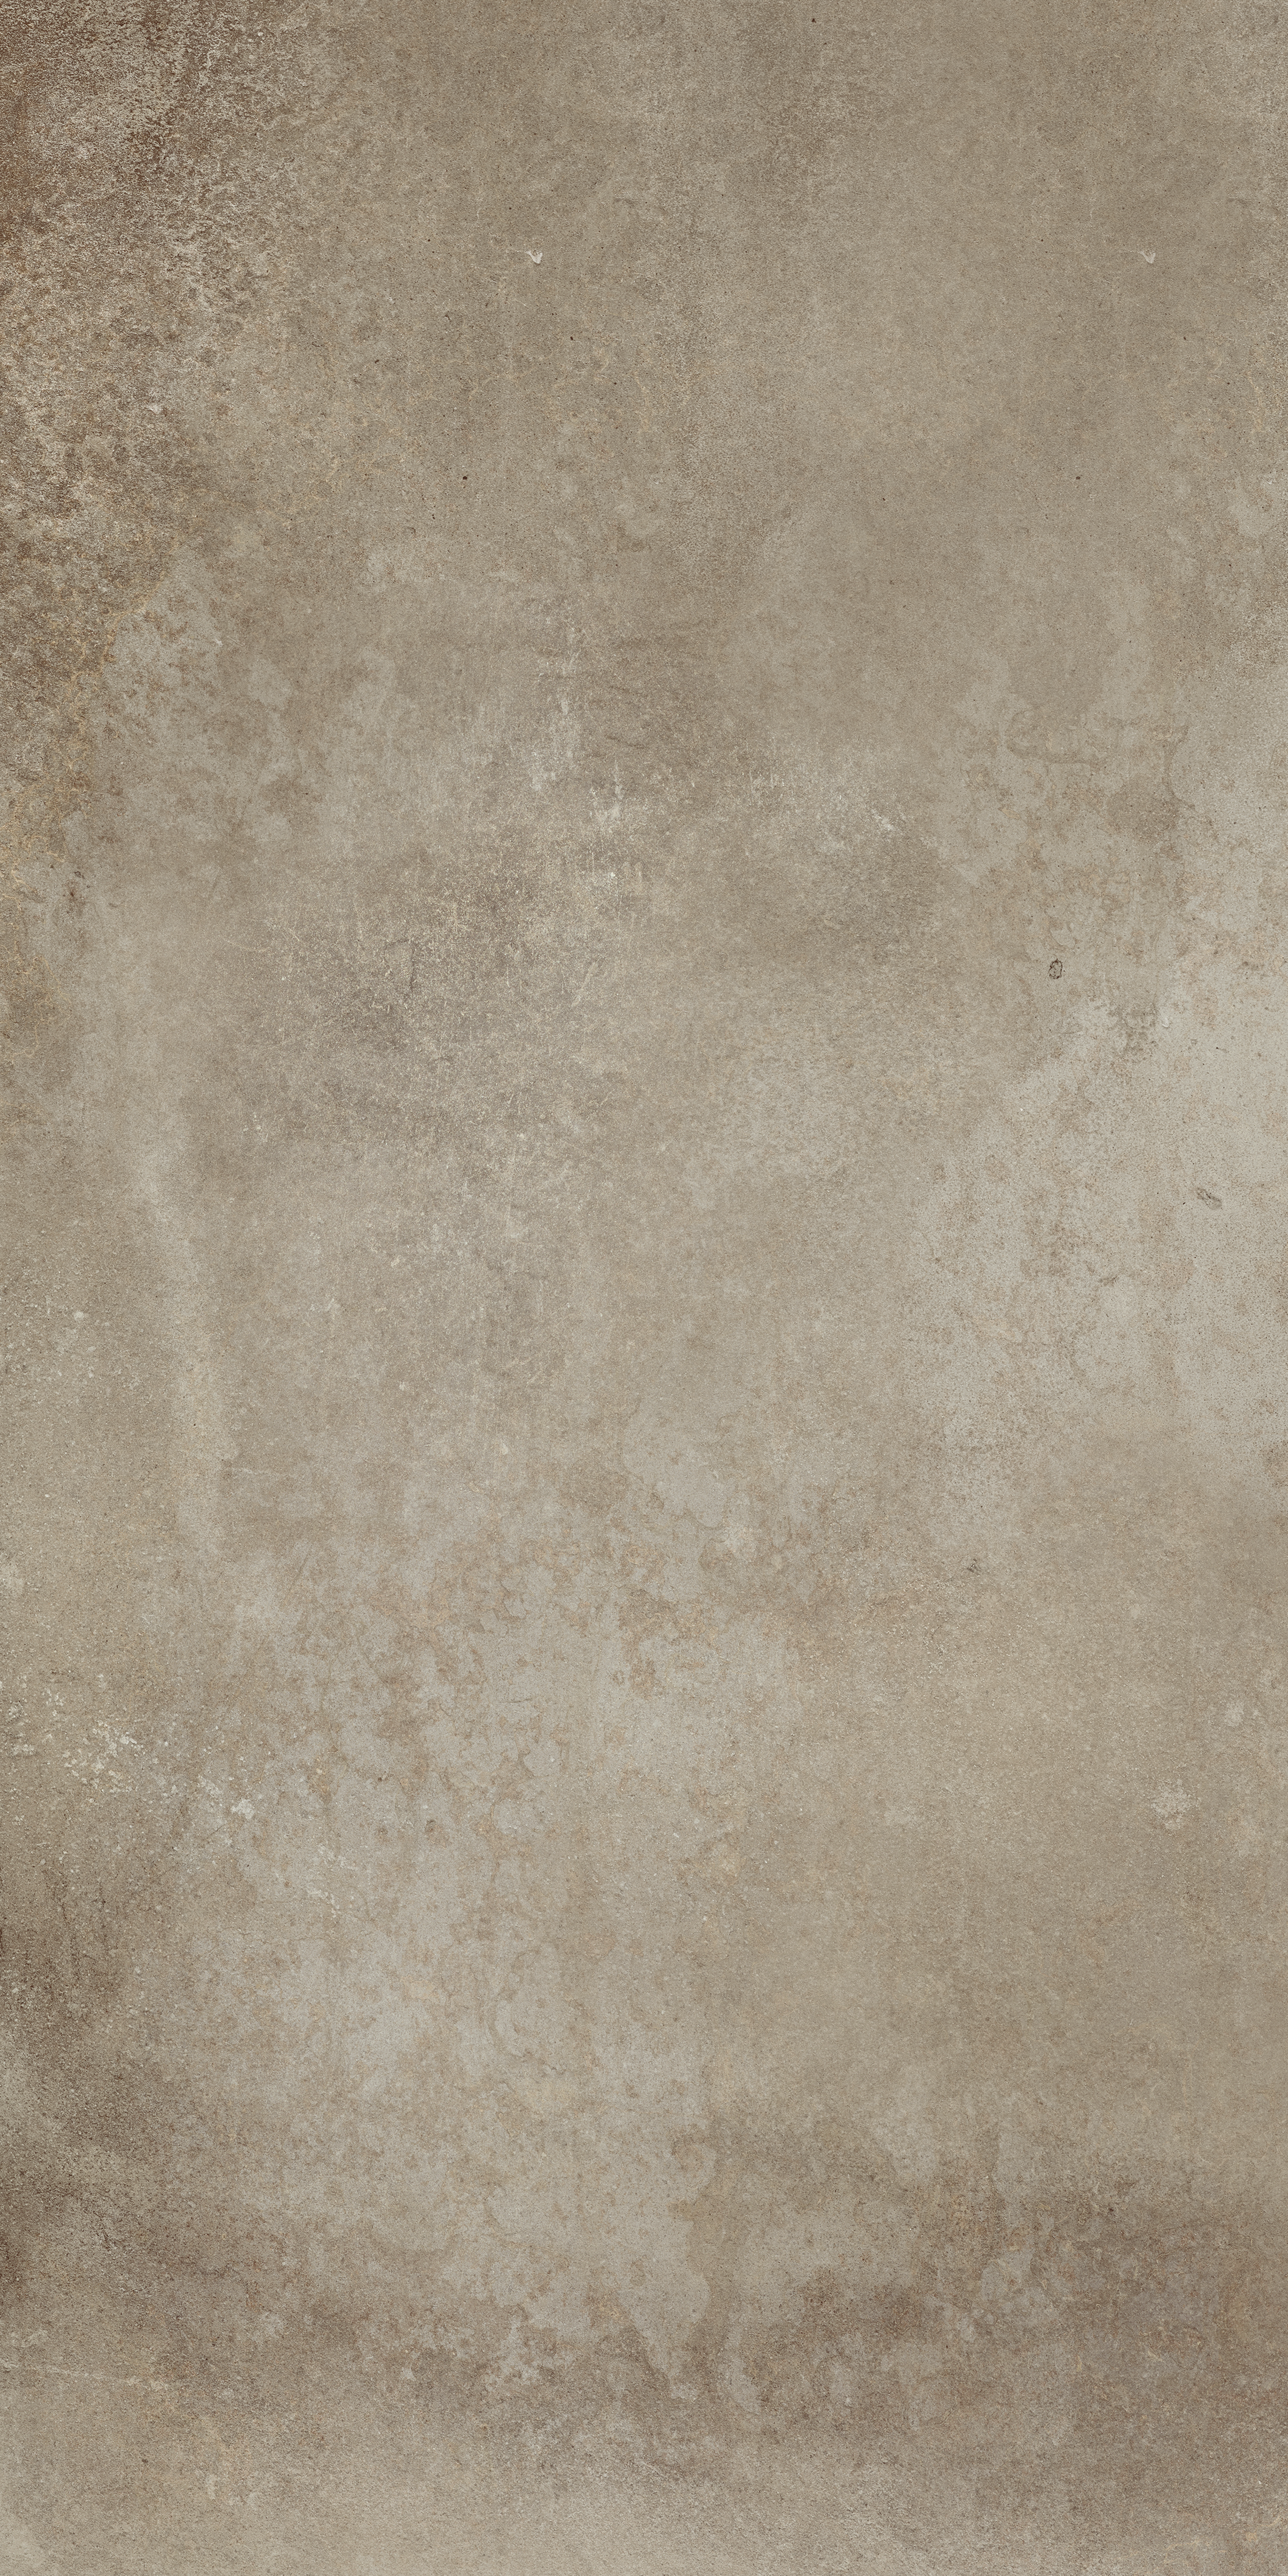 iron pattern color body porcelain field tile from ceraforge anatolia collection distributed by surface group international matte finish rectified edge 16x32 rectangle shape